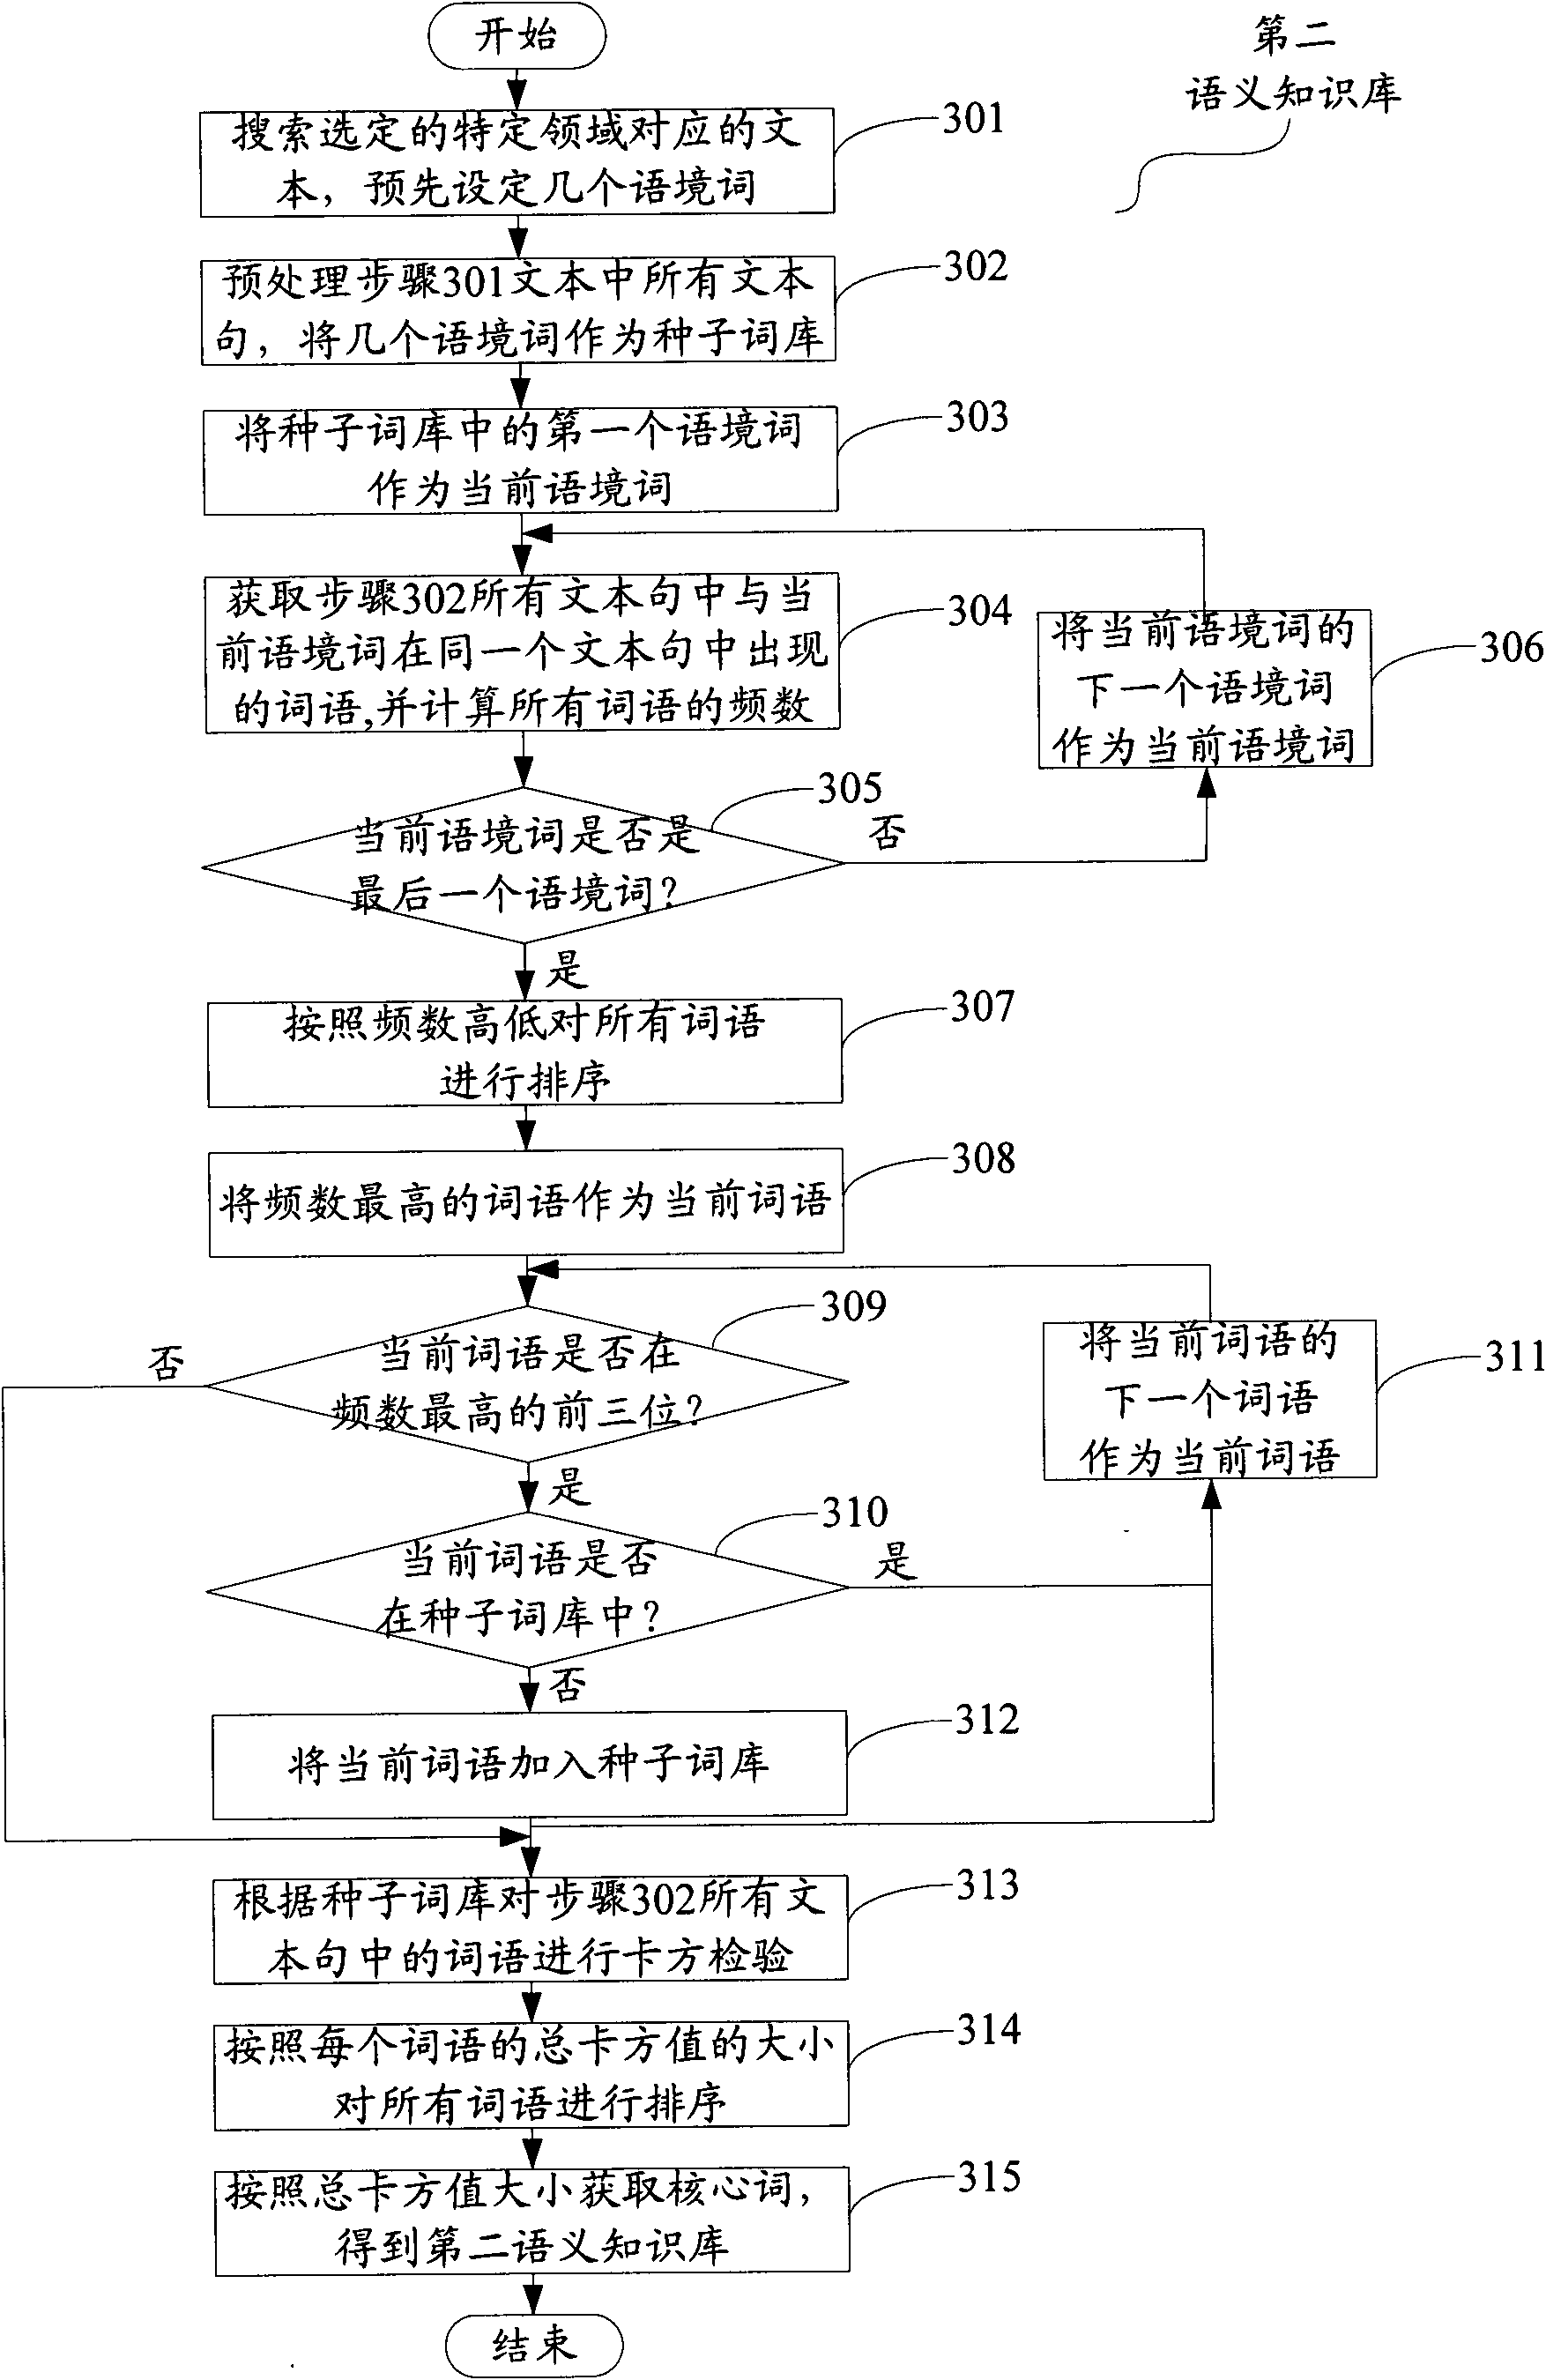 Method for detecting and correcting error on text after voice recognition